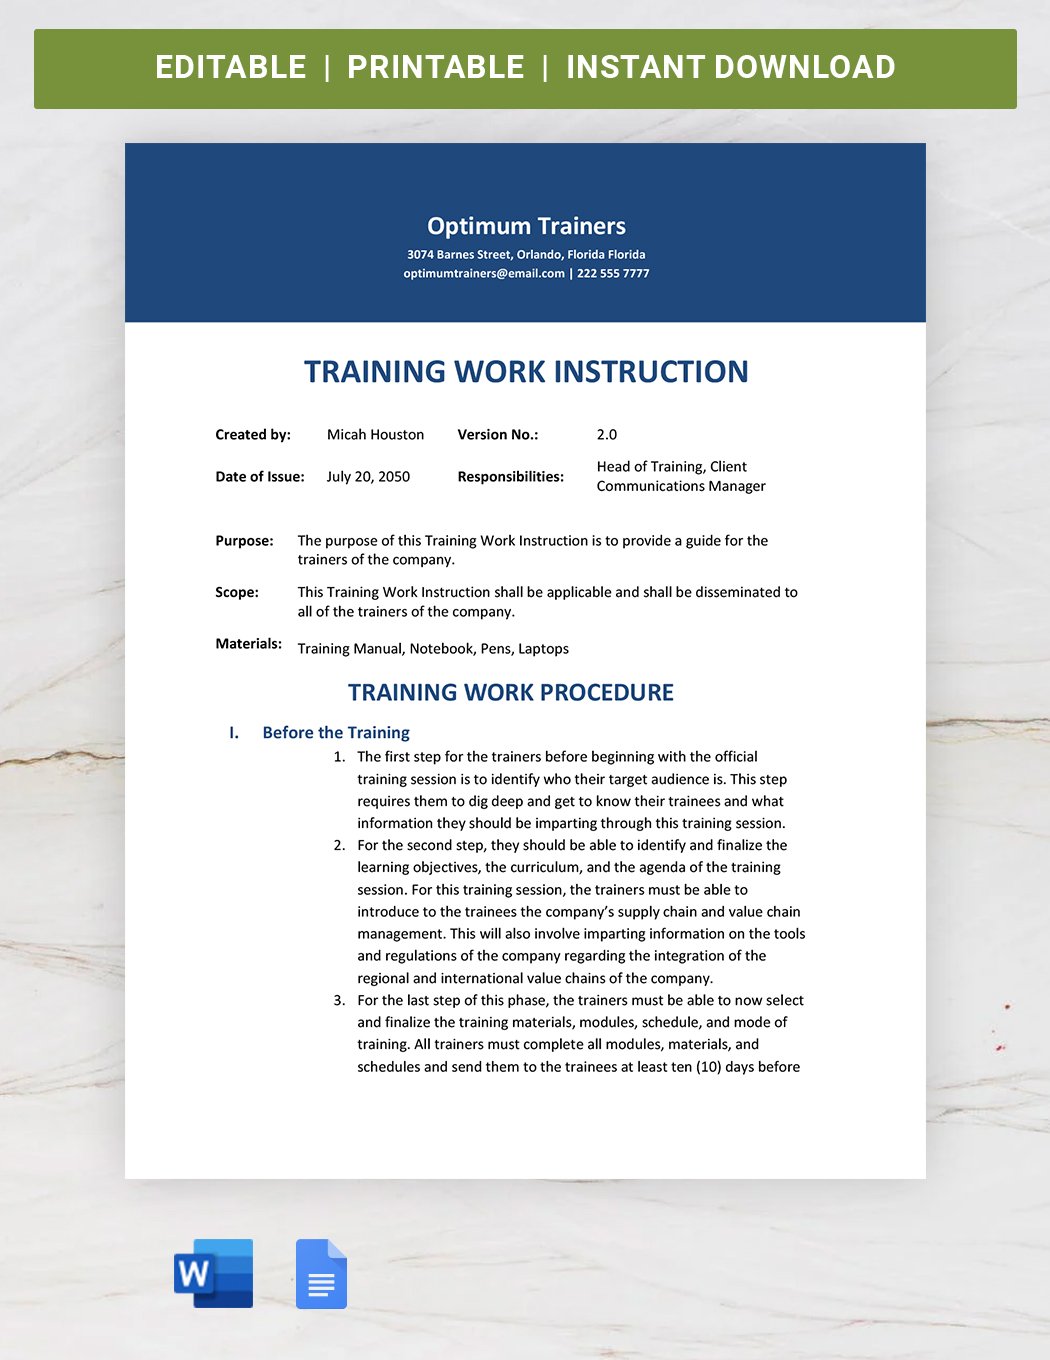 Training Work Instruction Template in Word, Google Docs